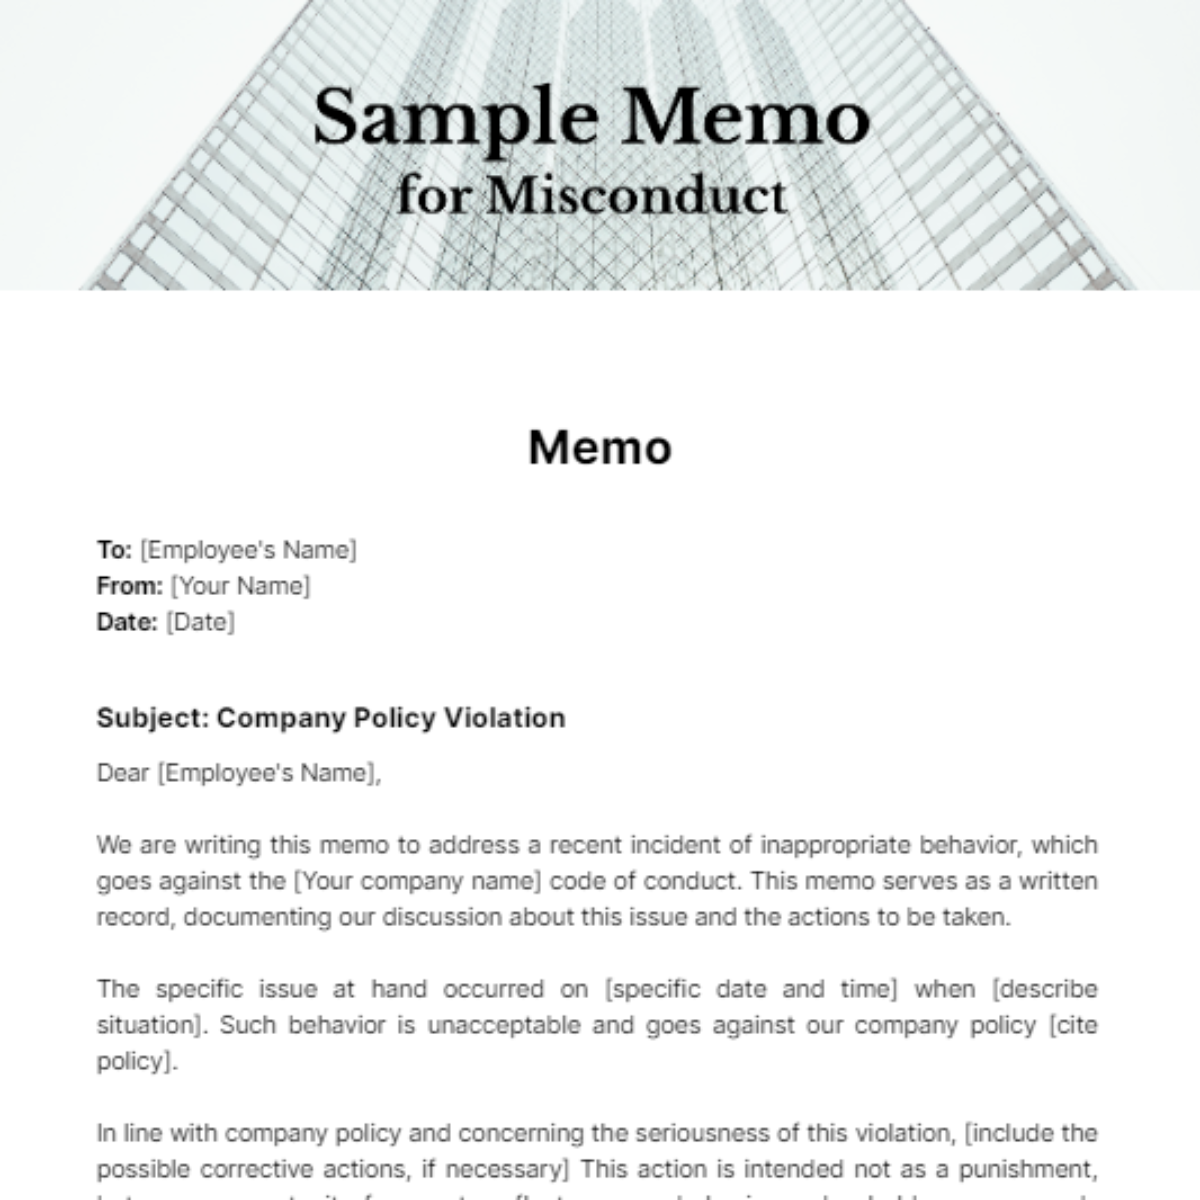 Sample Memo for Misconduct